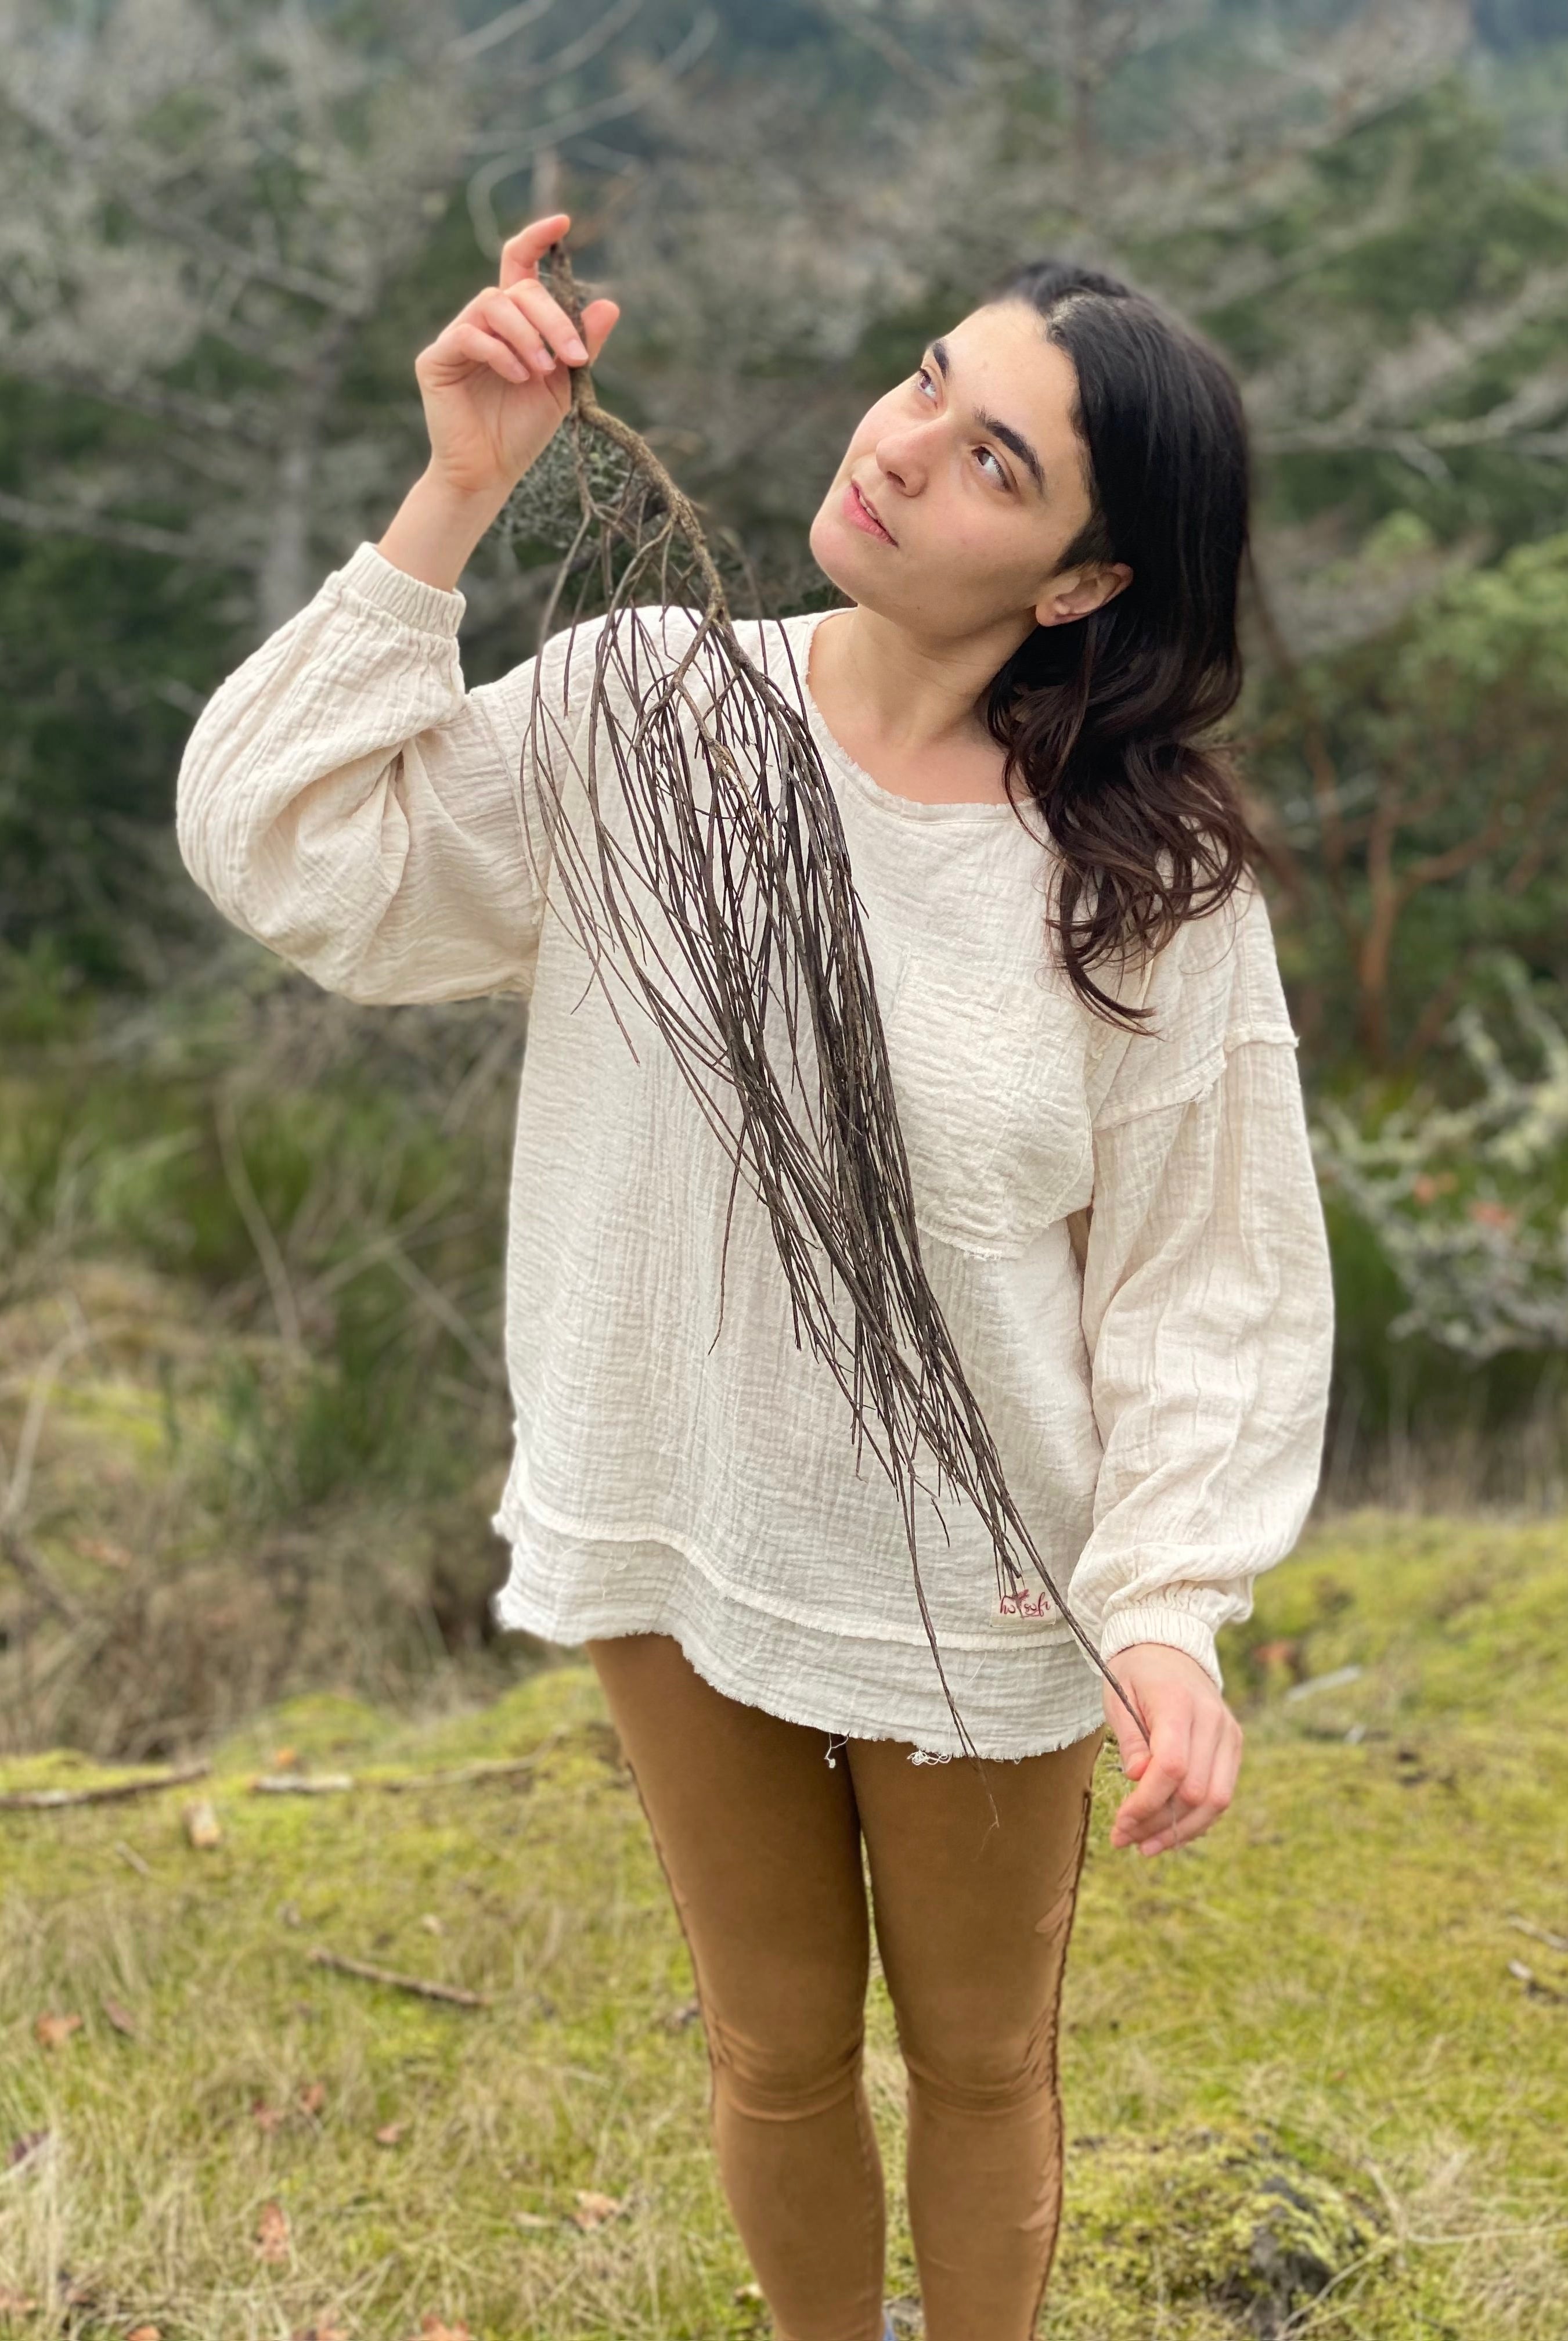 This image shows a woman in a natural outdoor setting, enjoying a moment of tranquility. She is dressed in an off-white, textured, long-sleeve blouse with a relaxed fit, paired with form-fitting, olive-green leggings and appears to be holding a thin branch or twig, eyes closed, seemingly appreciating the scent or texture of nature's offering.